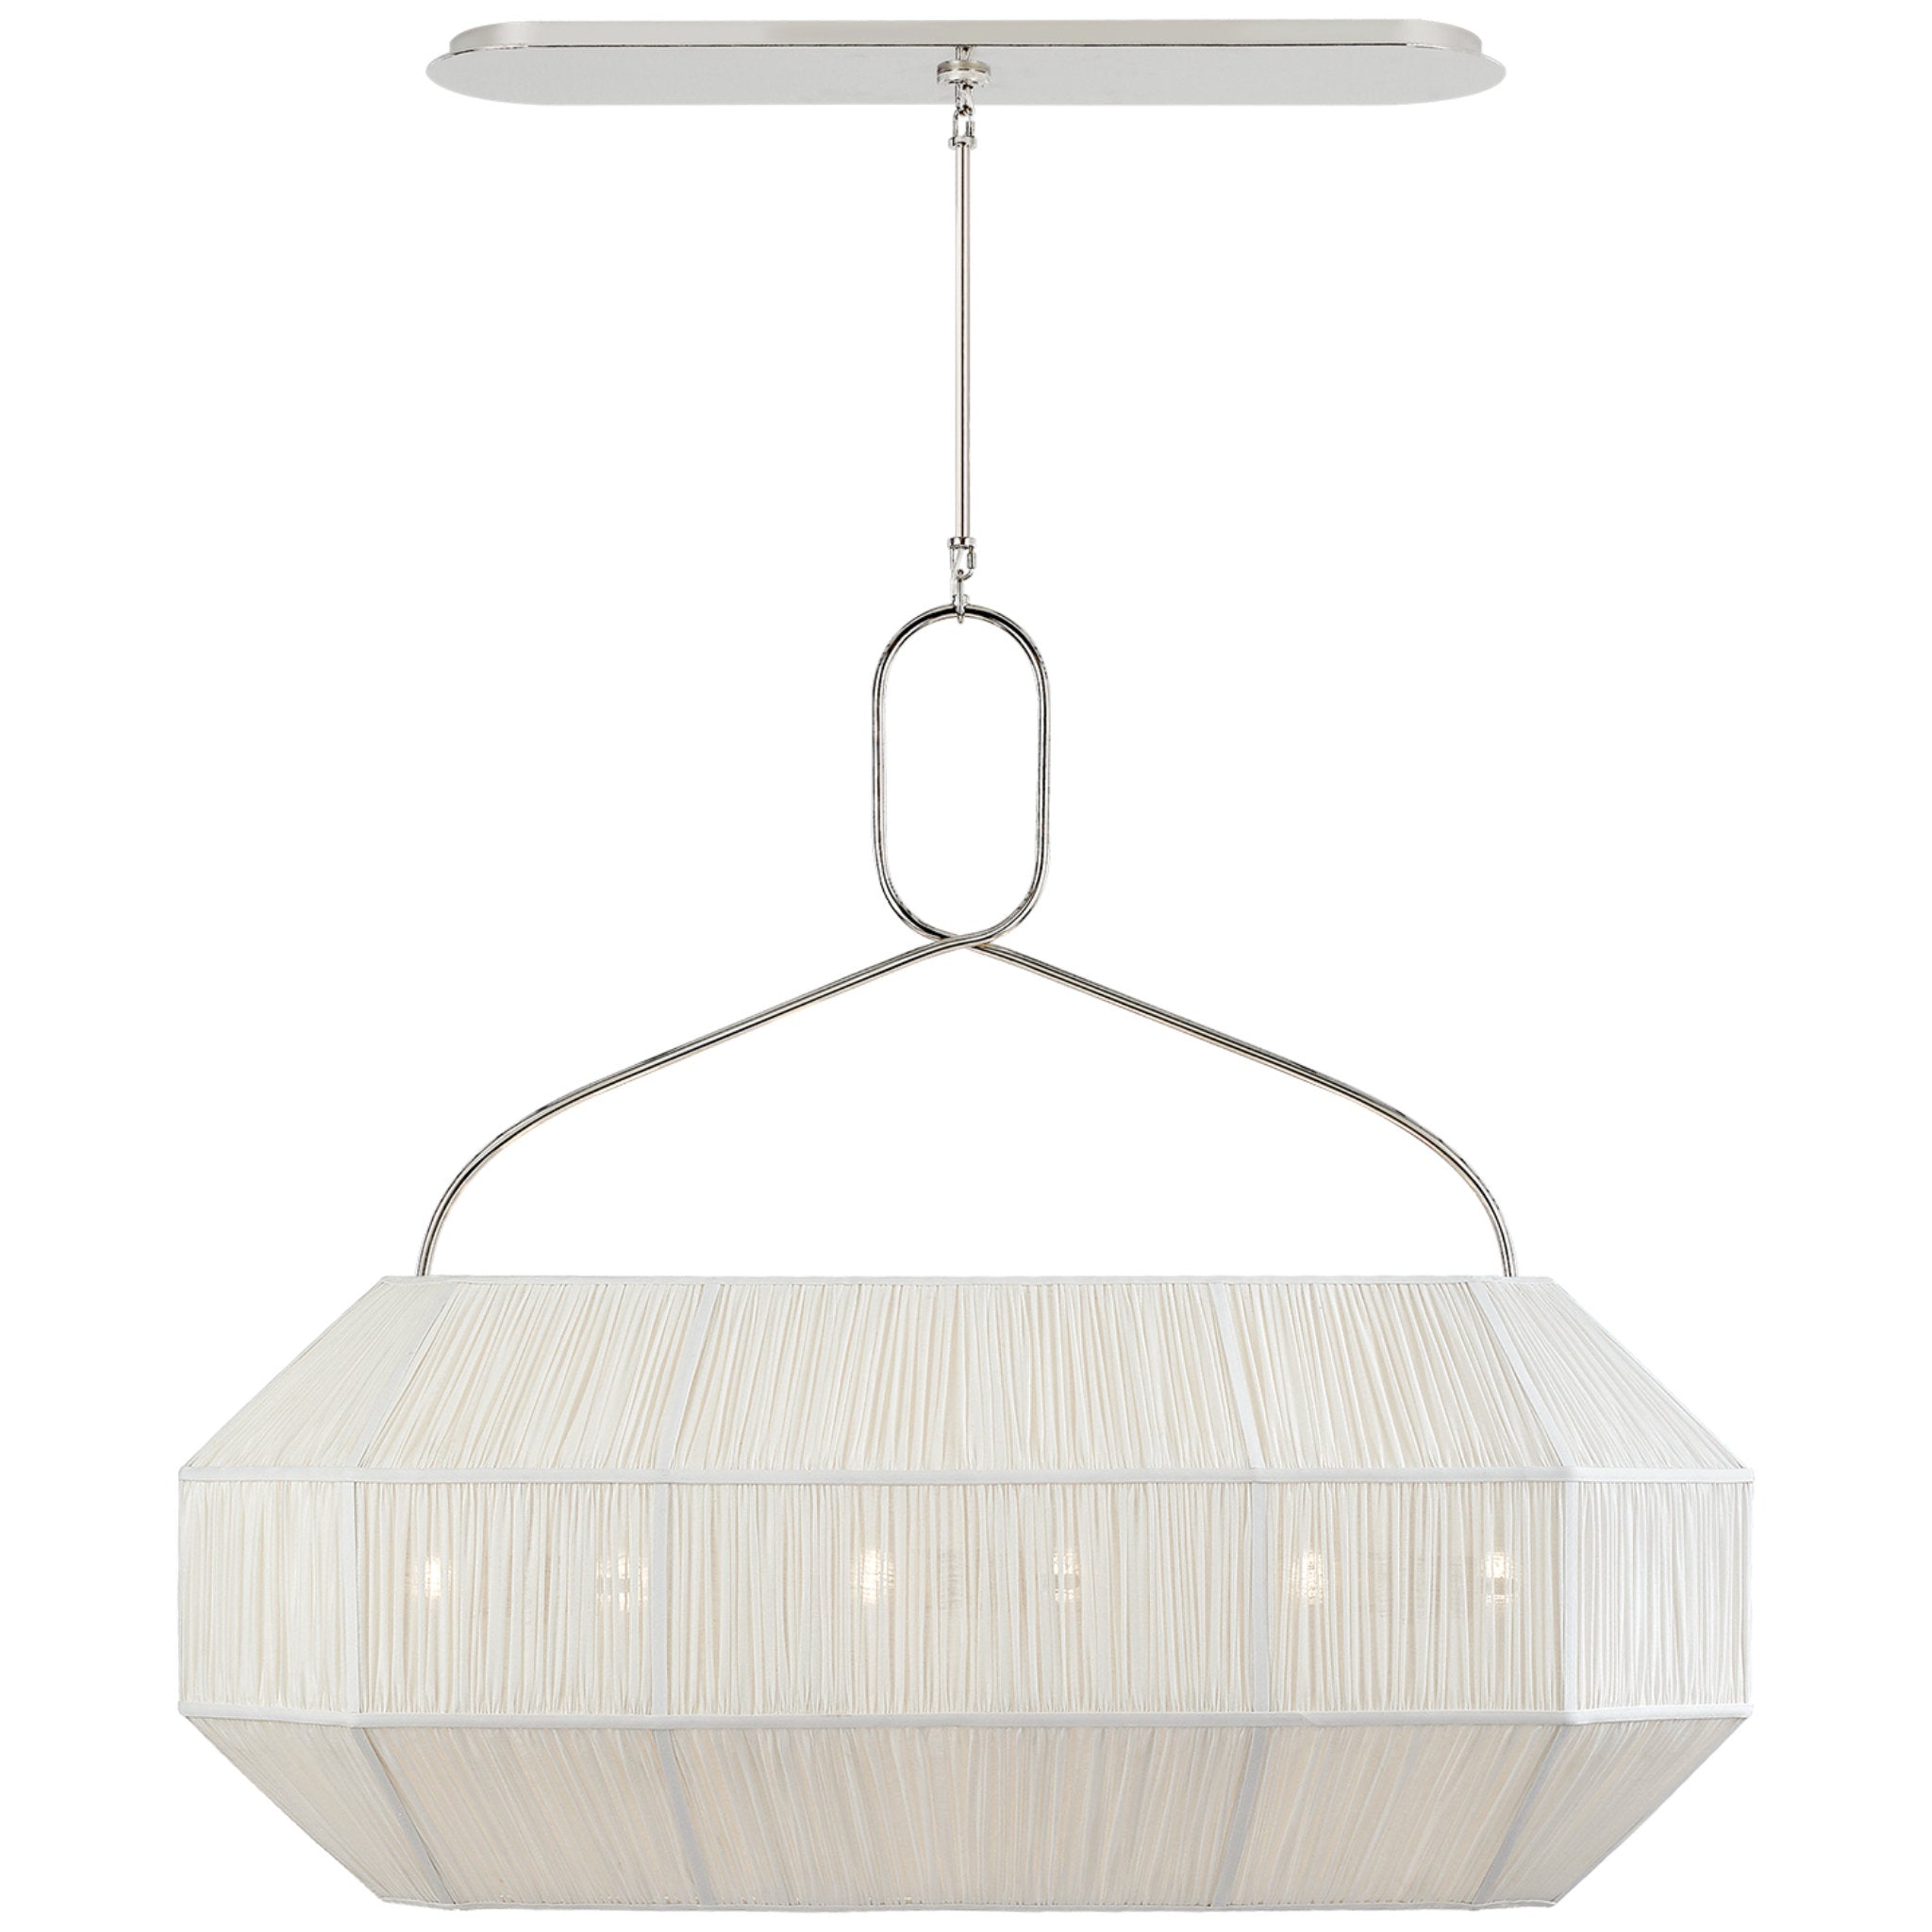 Kelly Wearstler Forza Medium Linear Lantern in Polished Nickel with Gathered Linen Shade